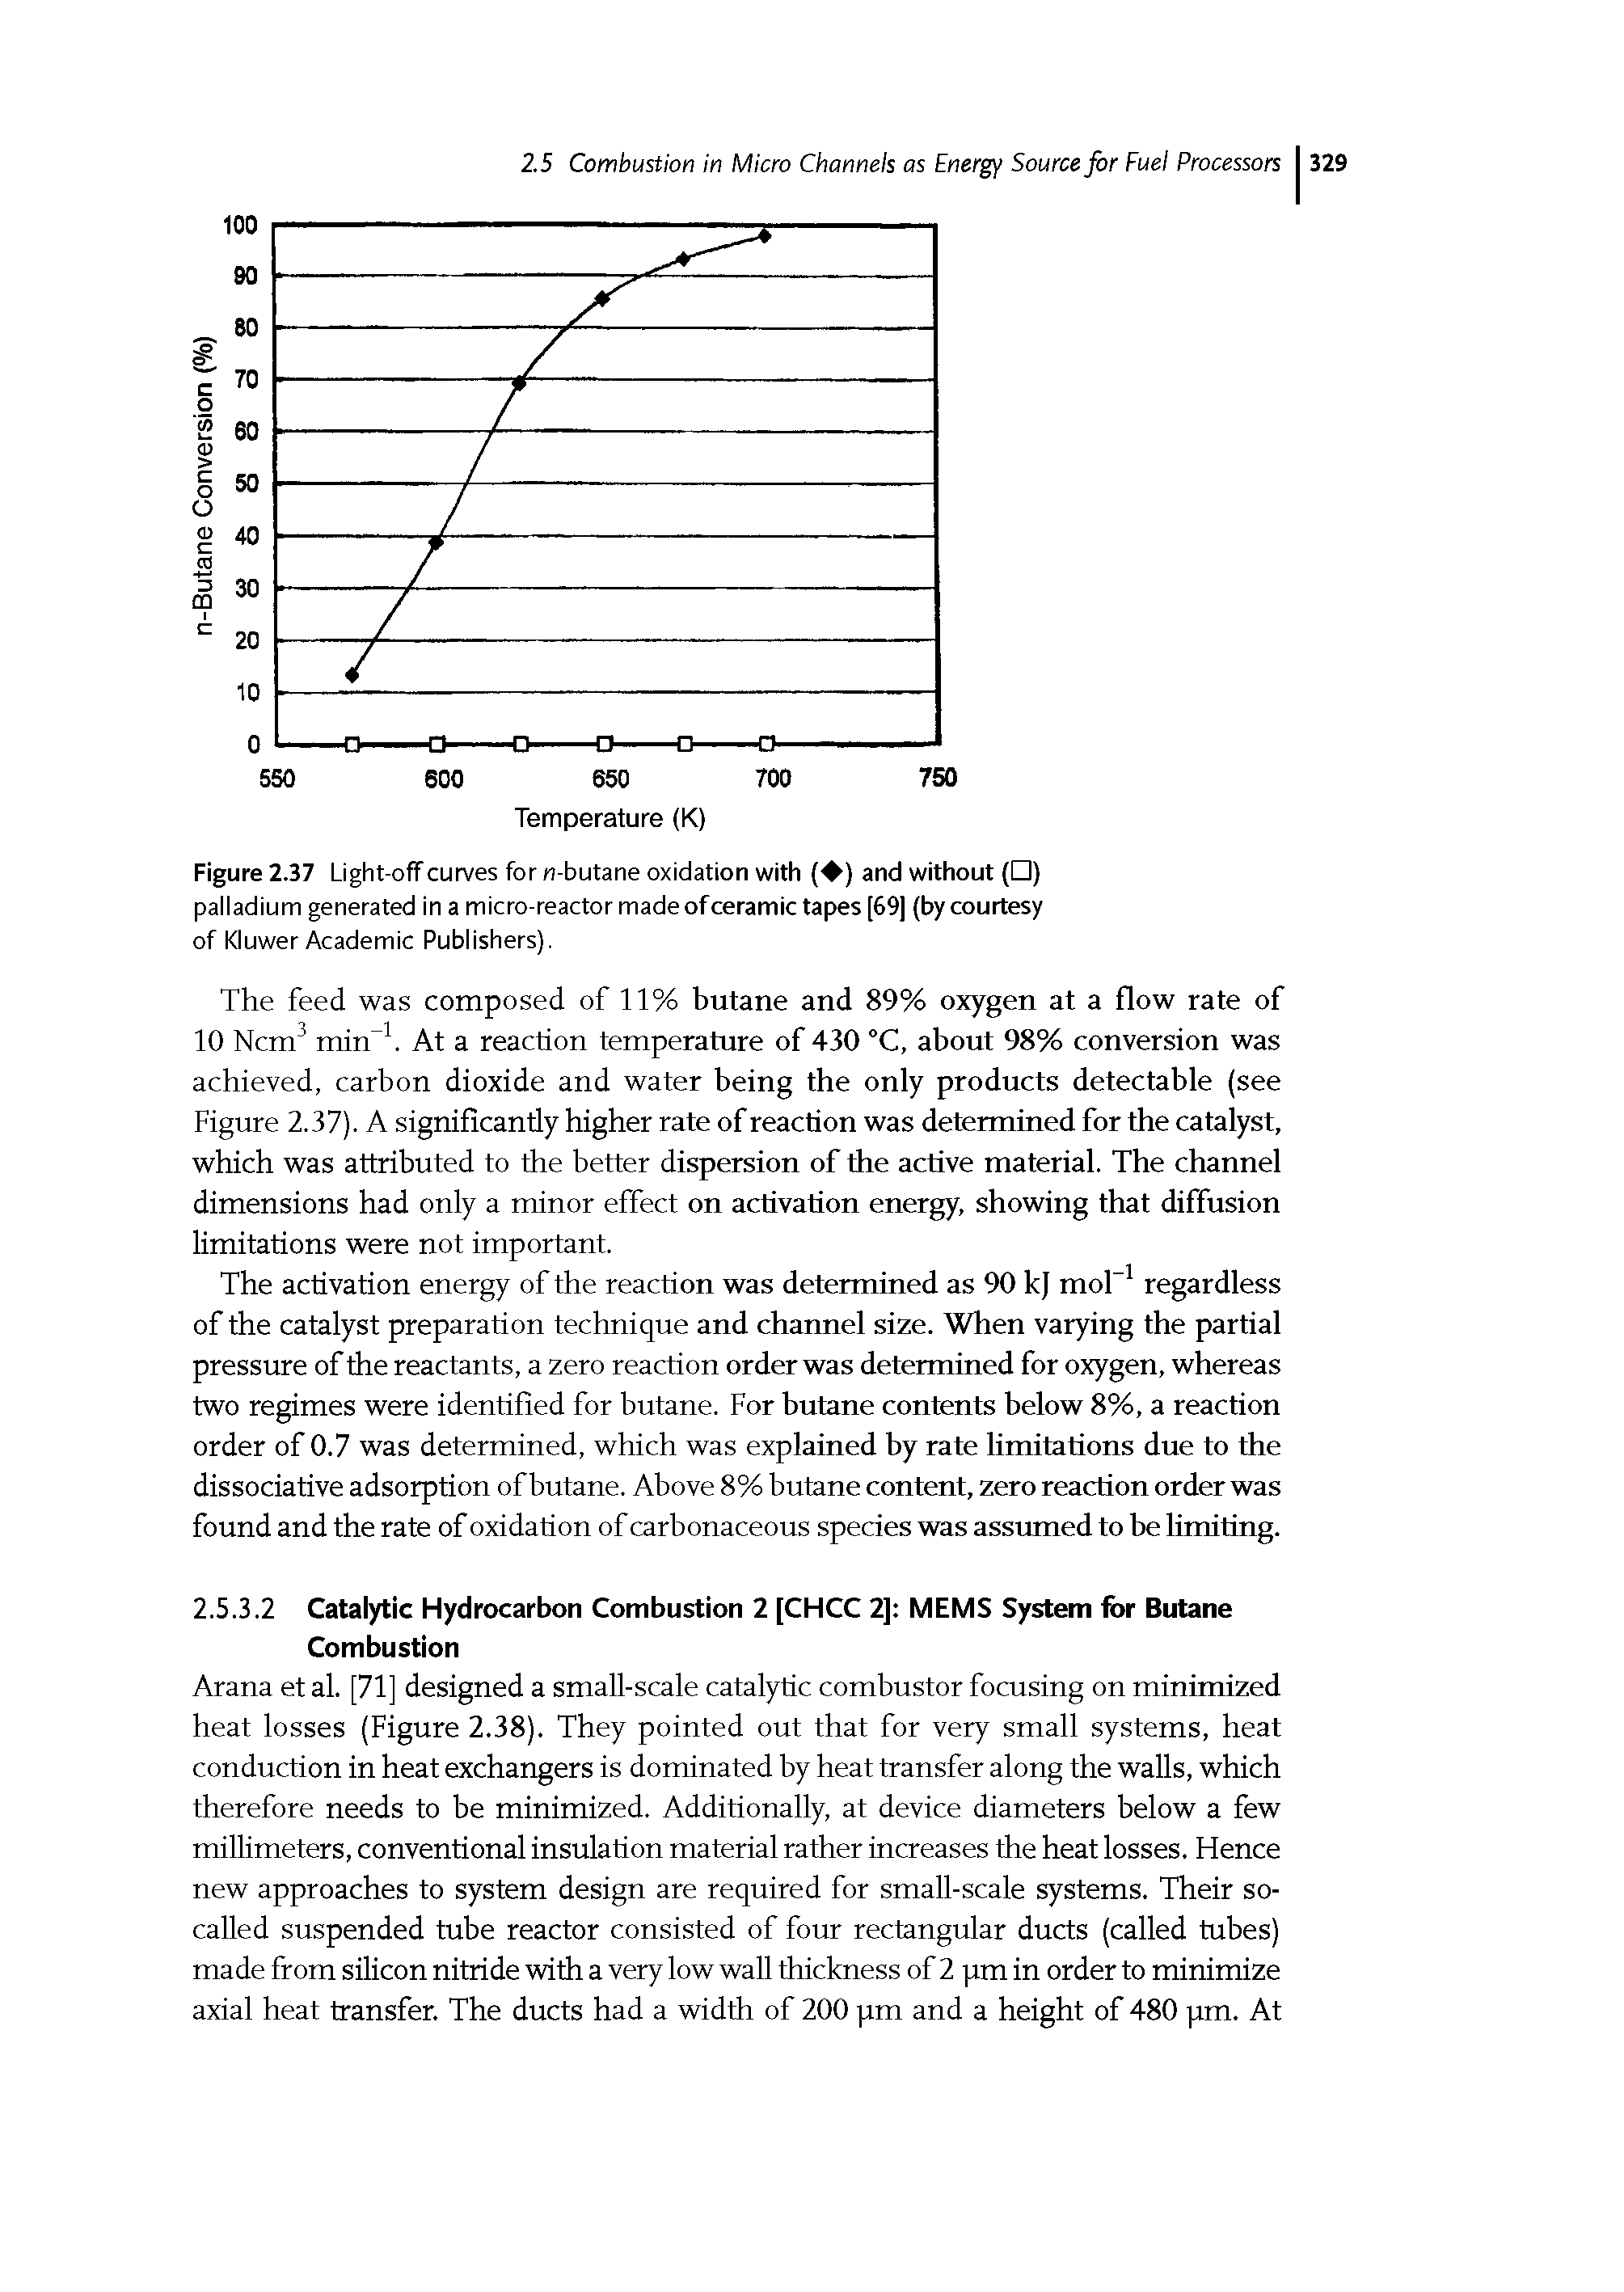 Figure 2.37 Light-ofTcurves for n-butane oxidation with ( ) and without ( ) palladium generated in a micro-reactor made of ceramic tapes [69] (by courtesy of Kluwer Academic Publishers).